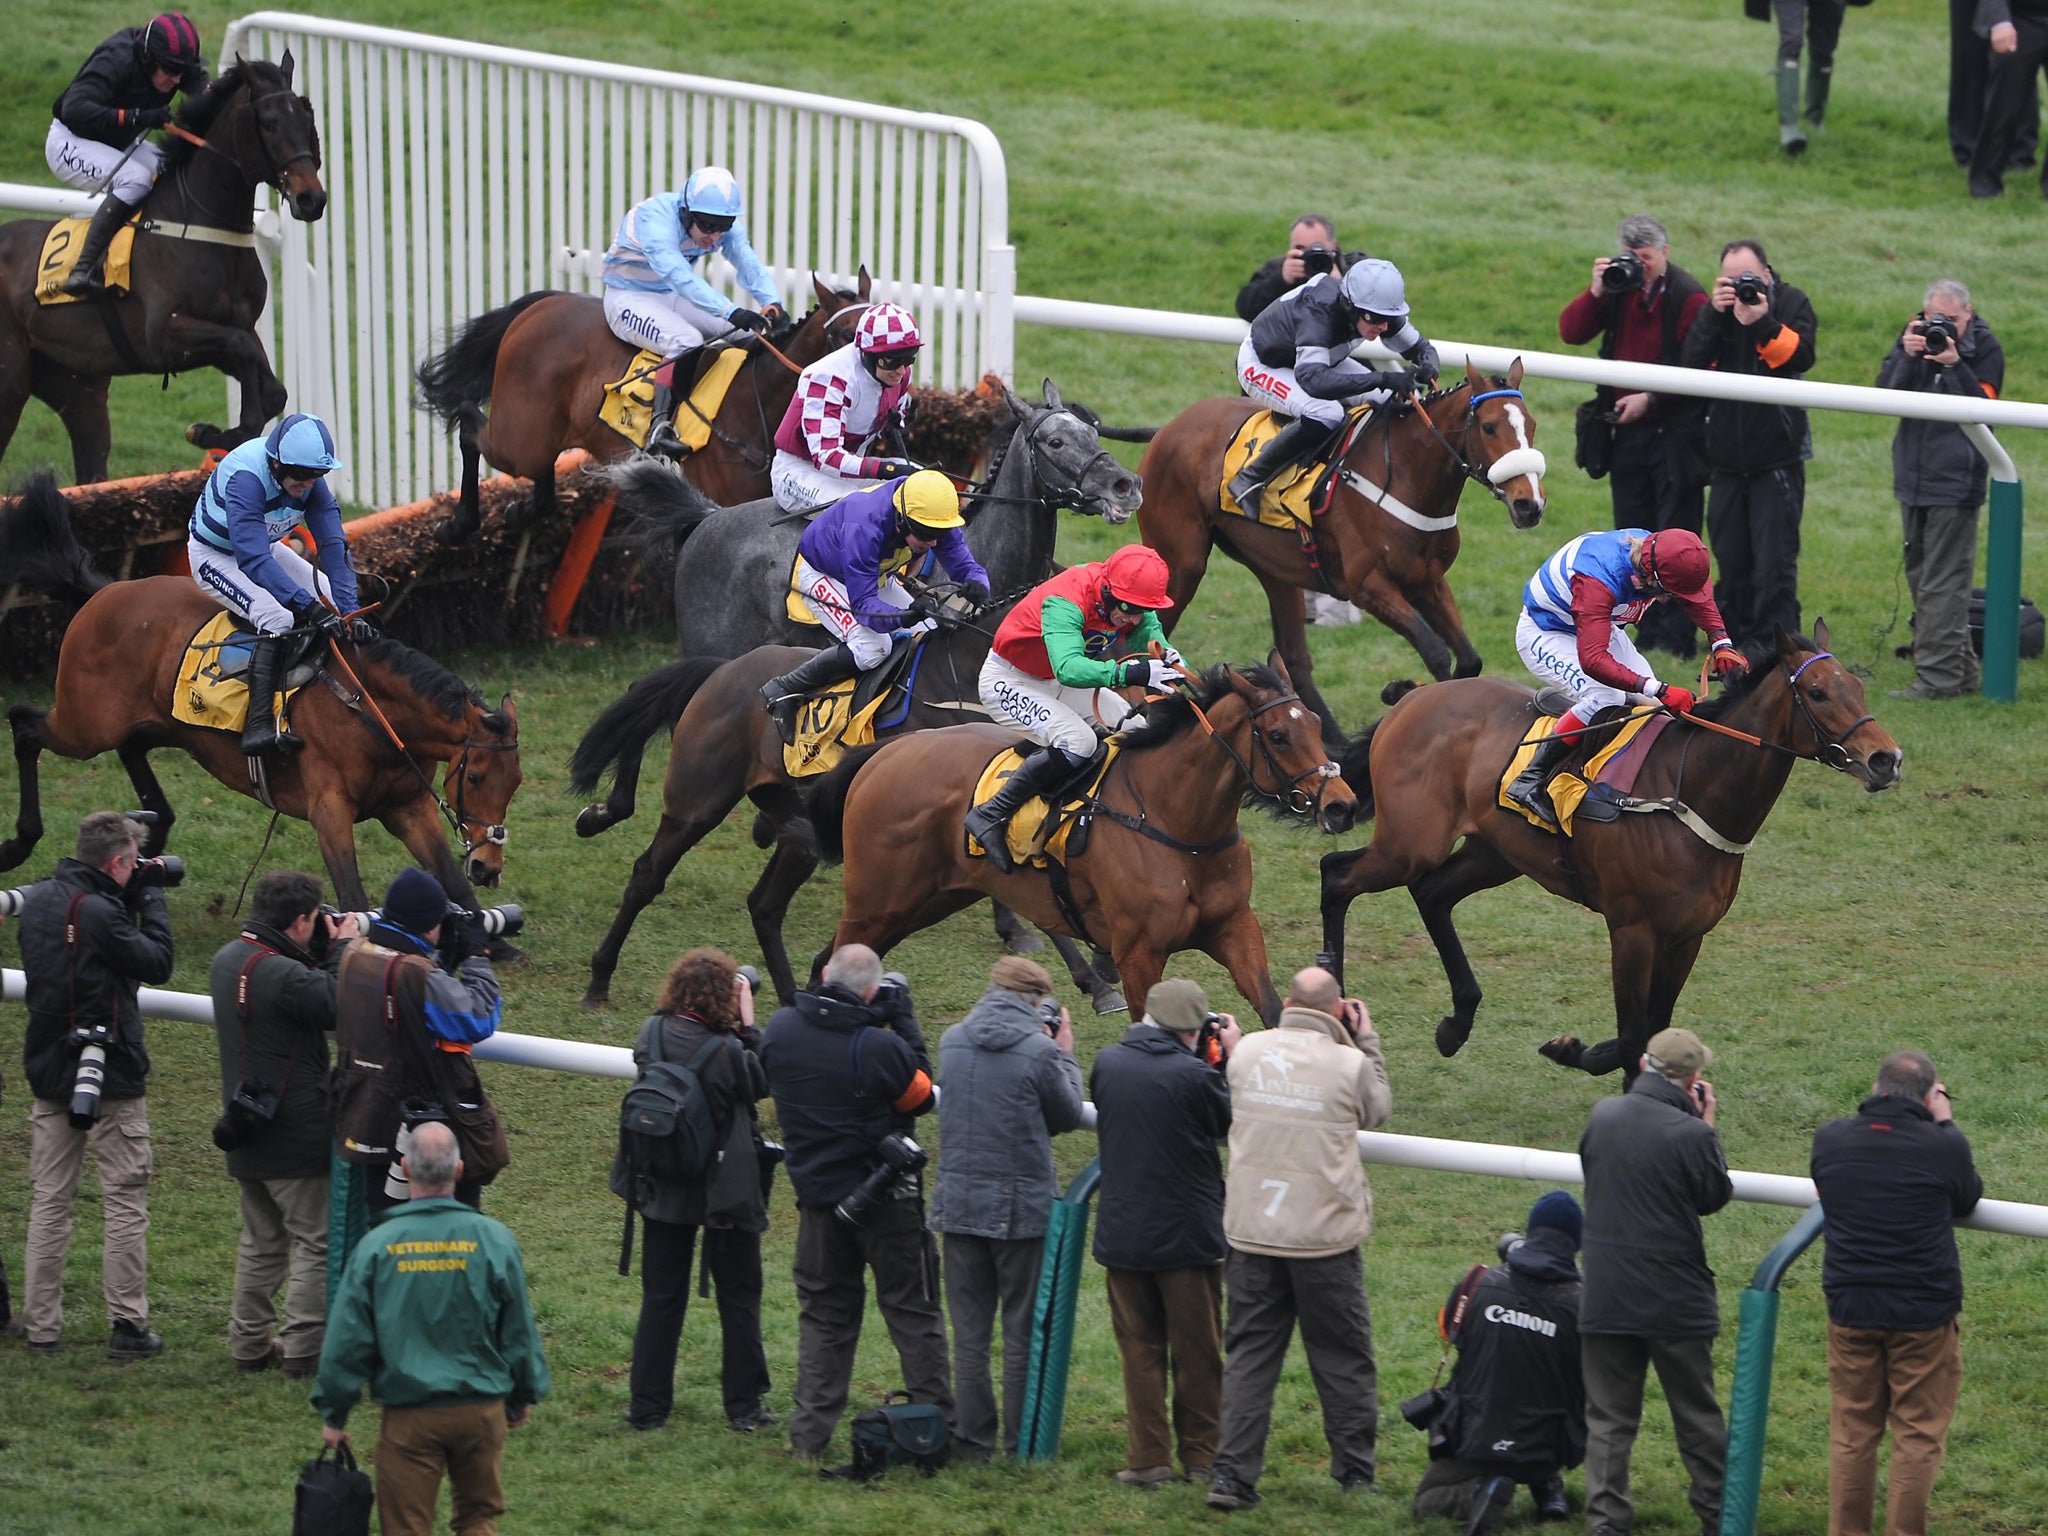 Racing during the 2012 Cheltenham festival when, a court heard, businessman Curtis Woodman hired the Embassy Club in Cheltenham to entertain racegoers